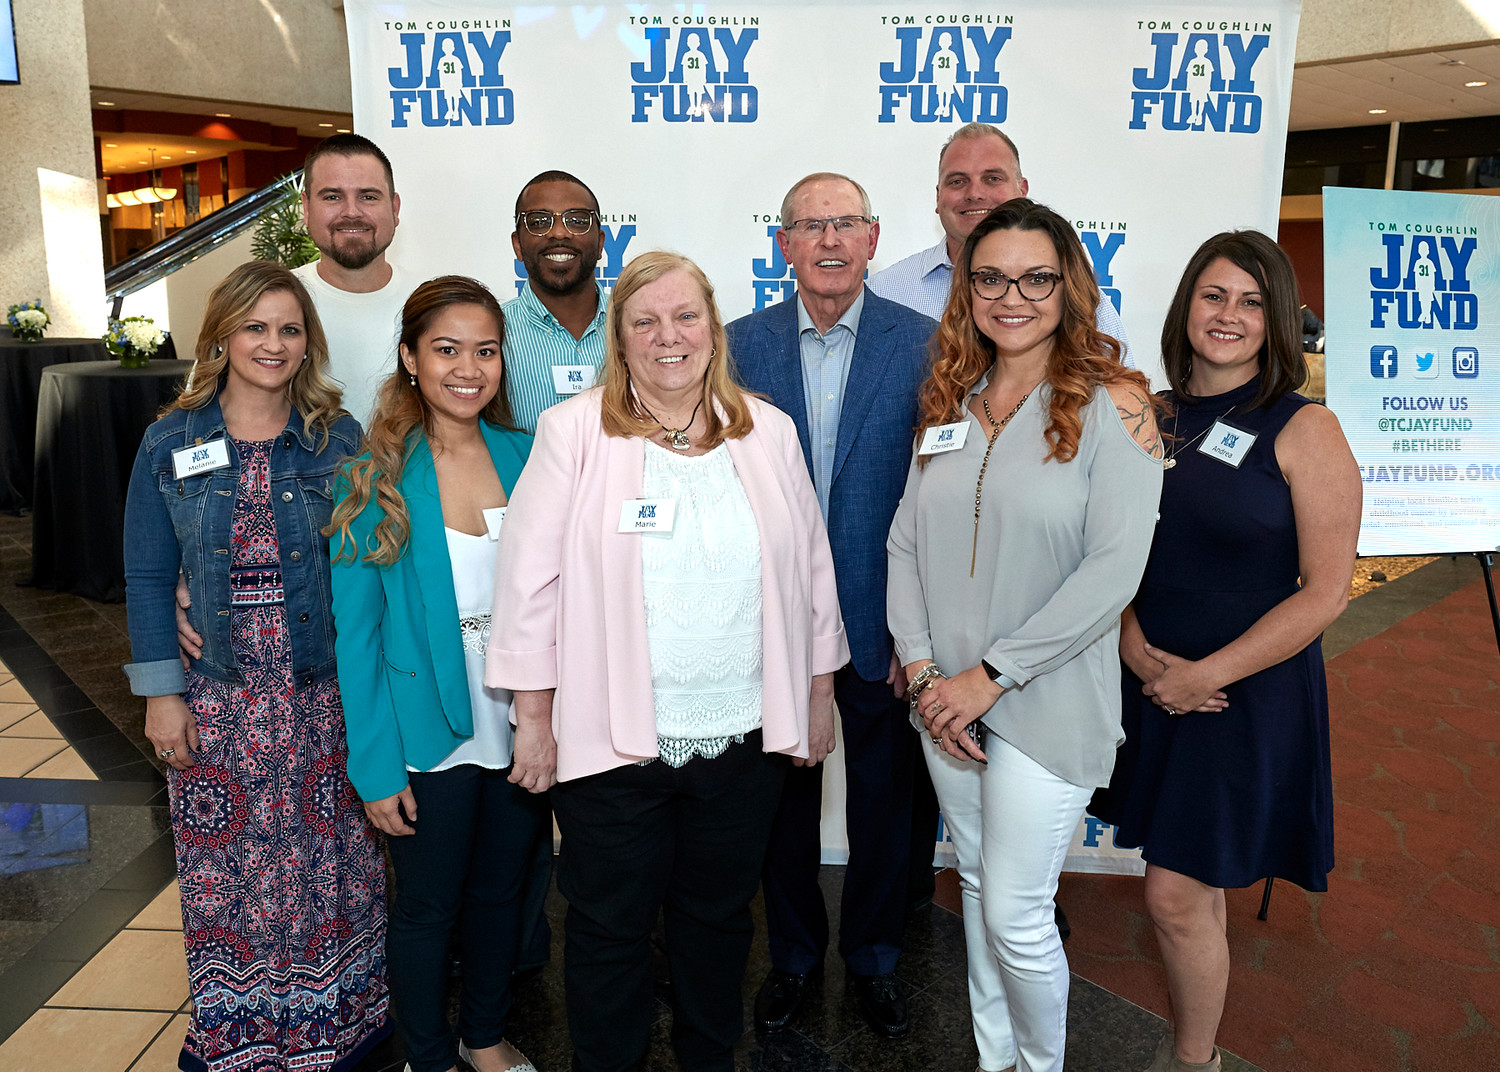 Tom Coughlin gathers with the evening’s VIP hosts, who are Jay Fund families whose child has tackled or is tackling cancer.